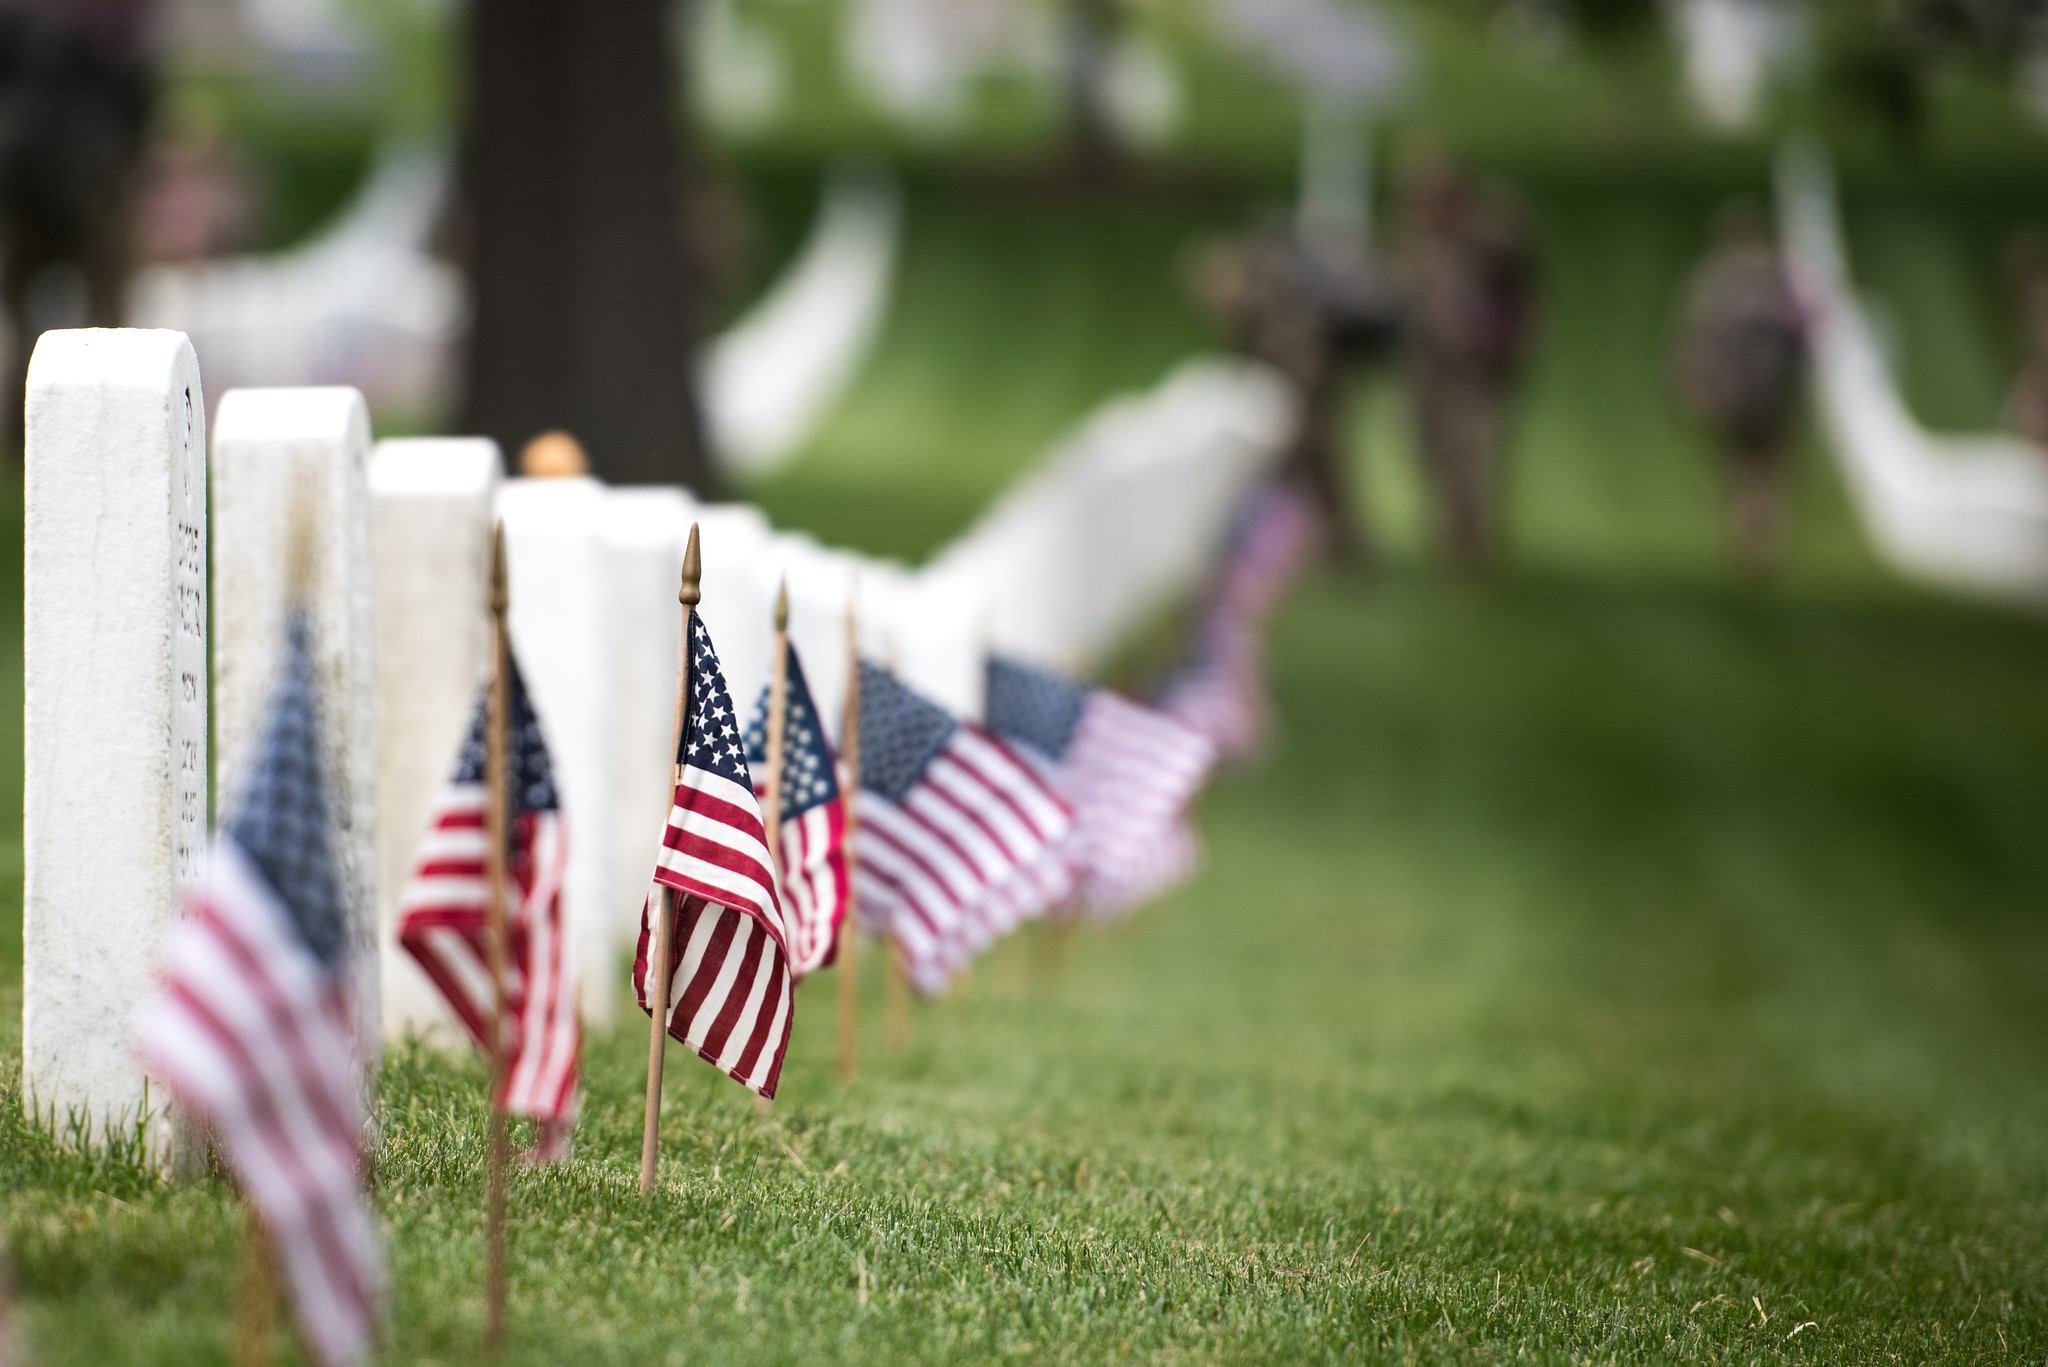 Memorial Day Honoring Those Who Gave Their Lives